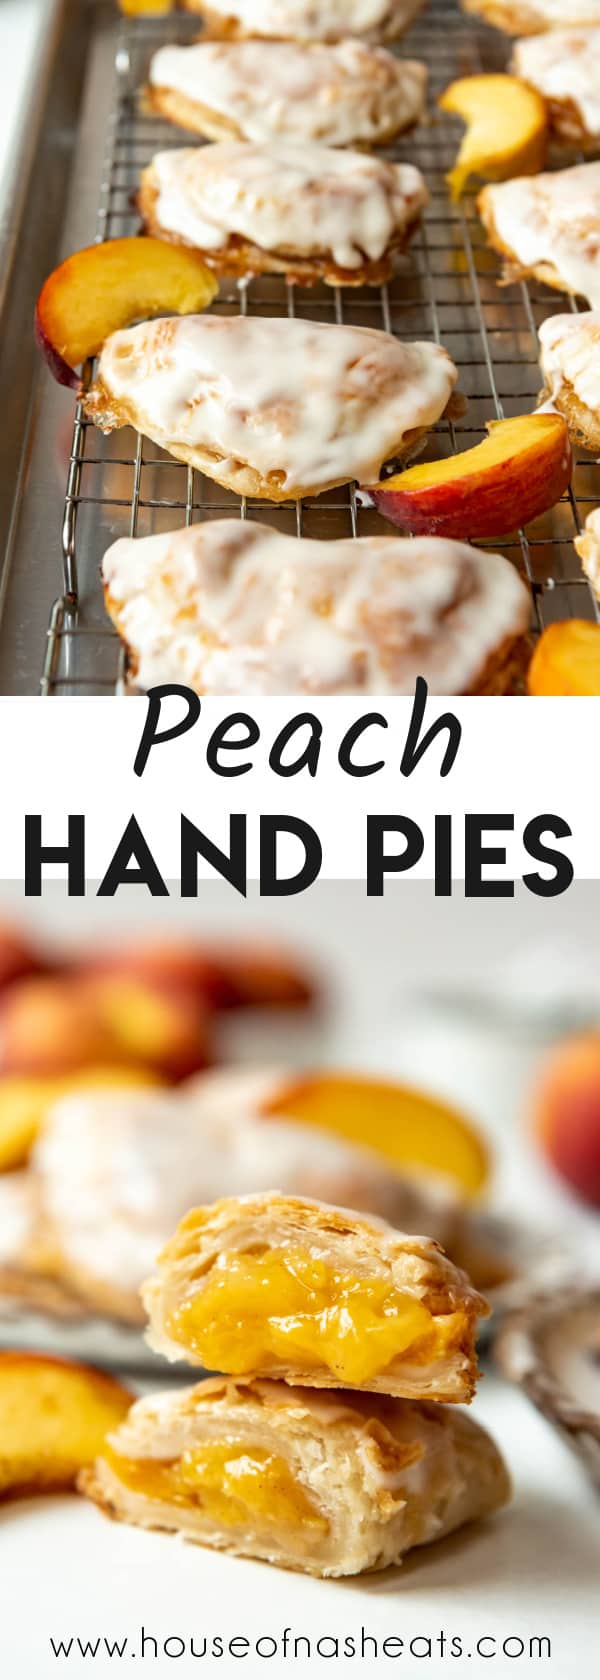 A collage of images of peach hand pies with text overlay.